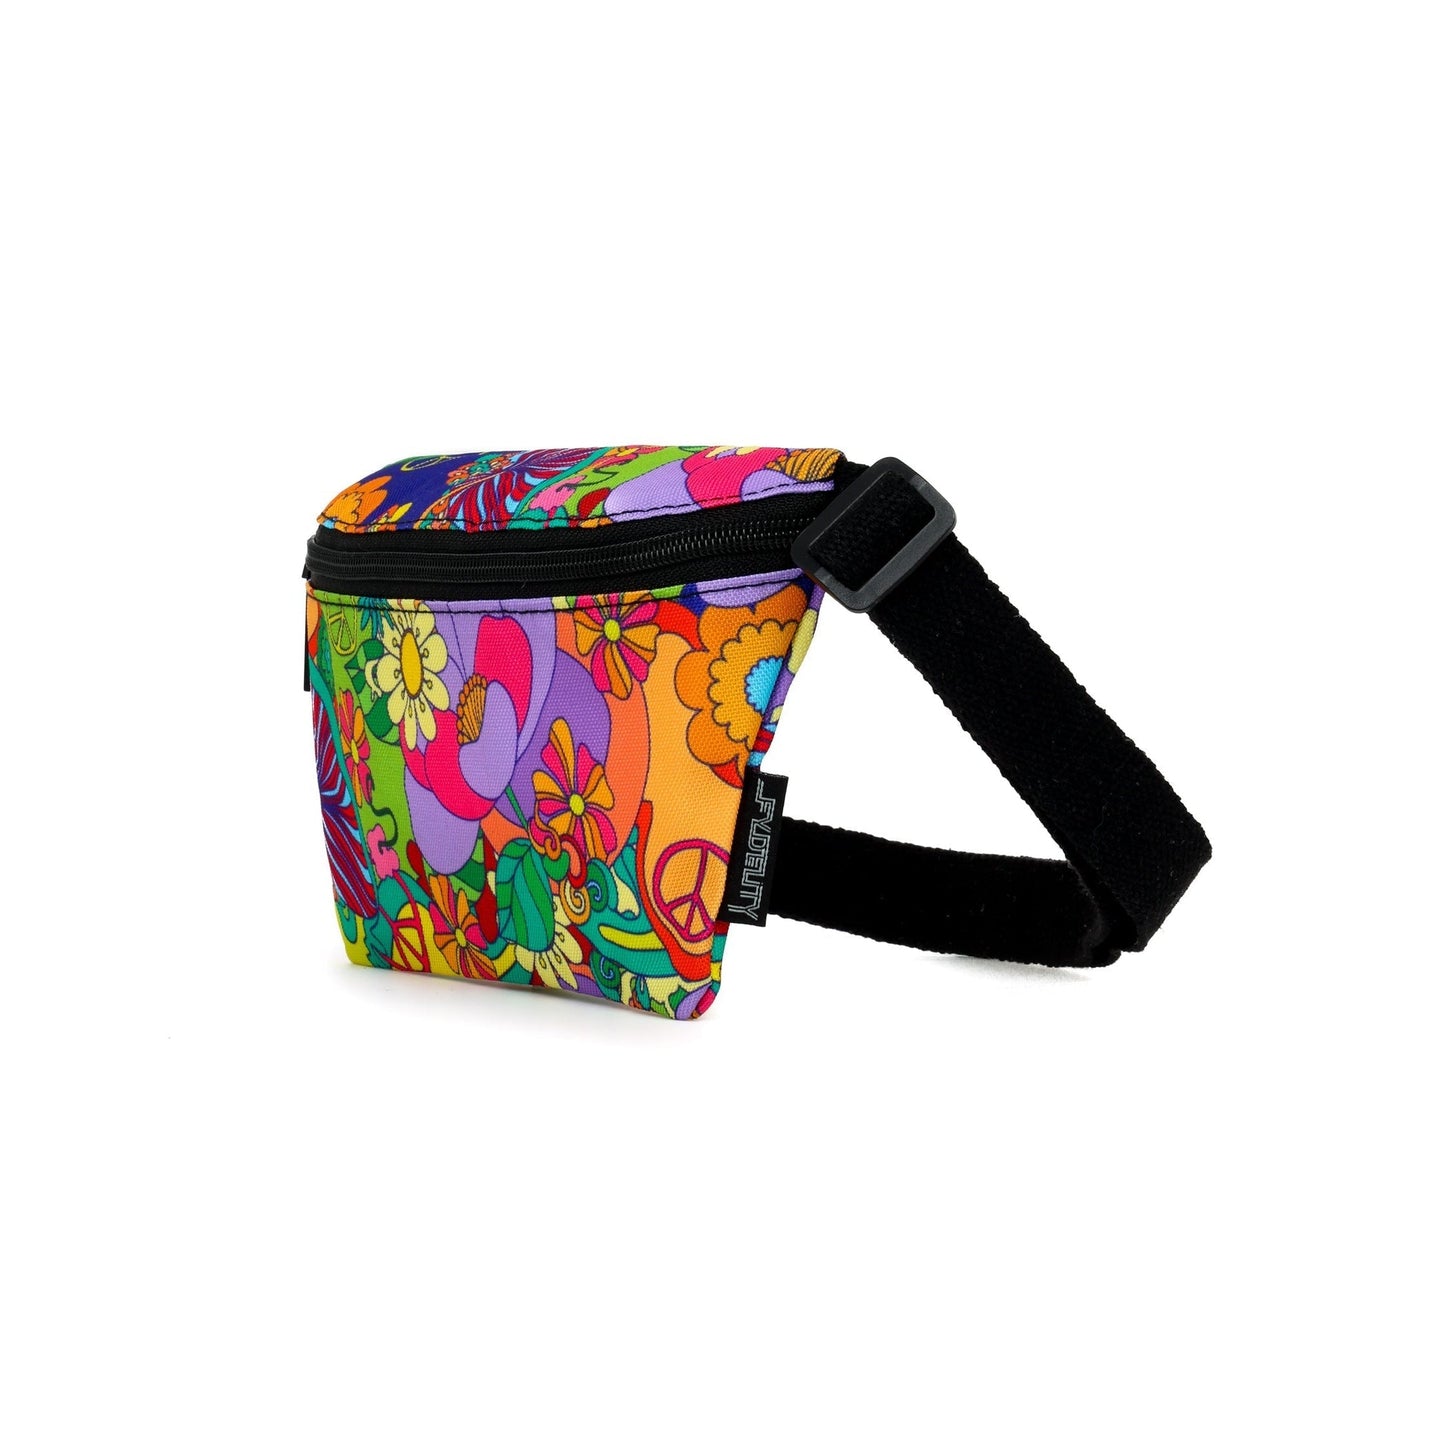 Wonderland 70's Psychedelic Small Ultra Slim Fanny Pack